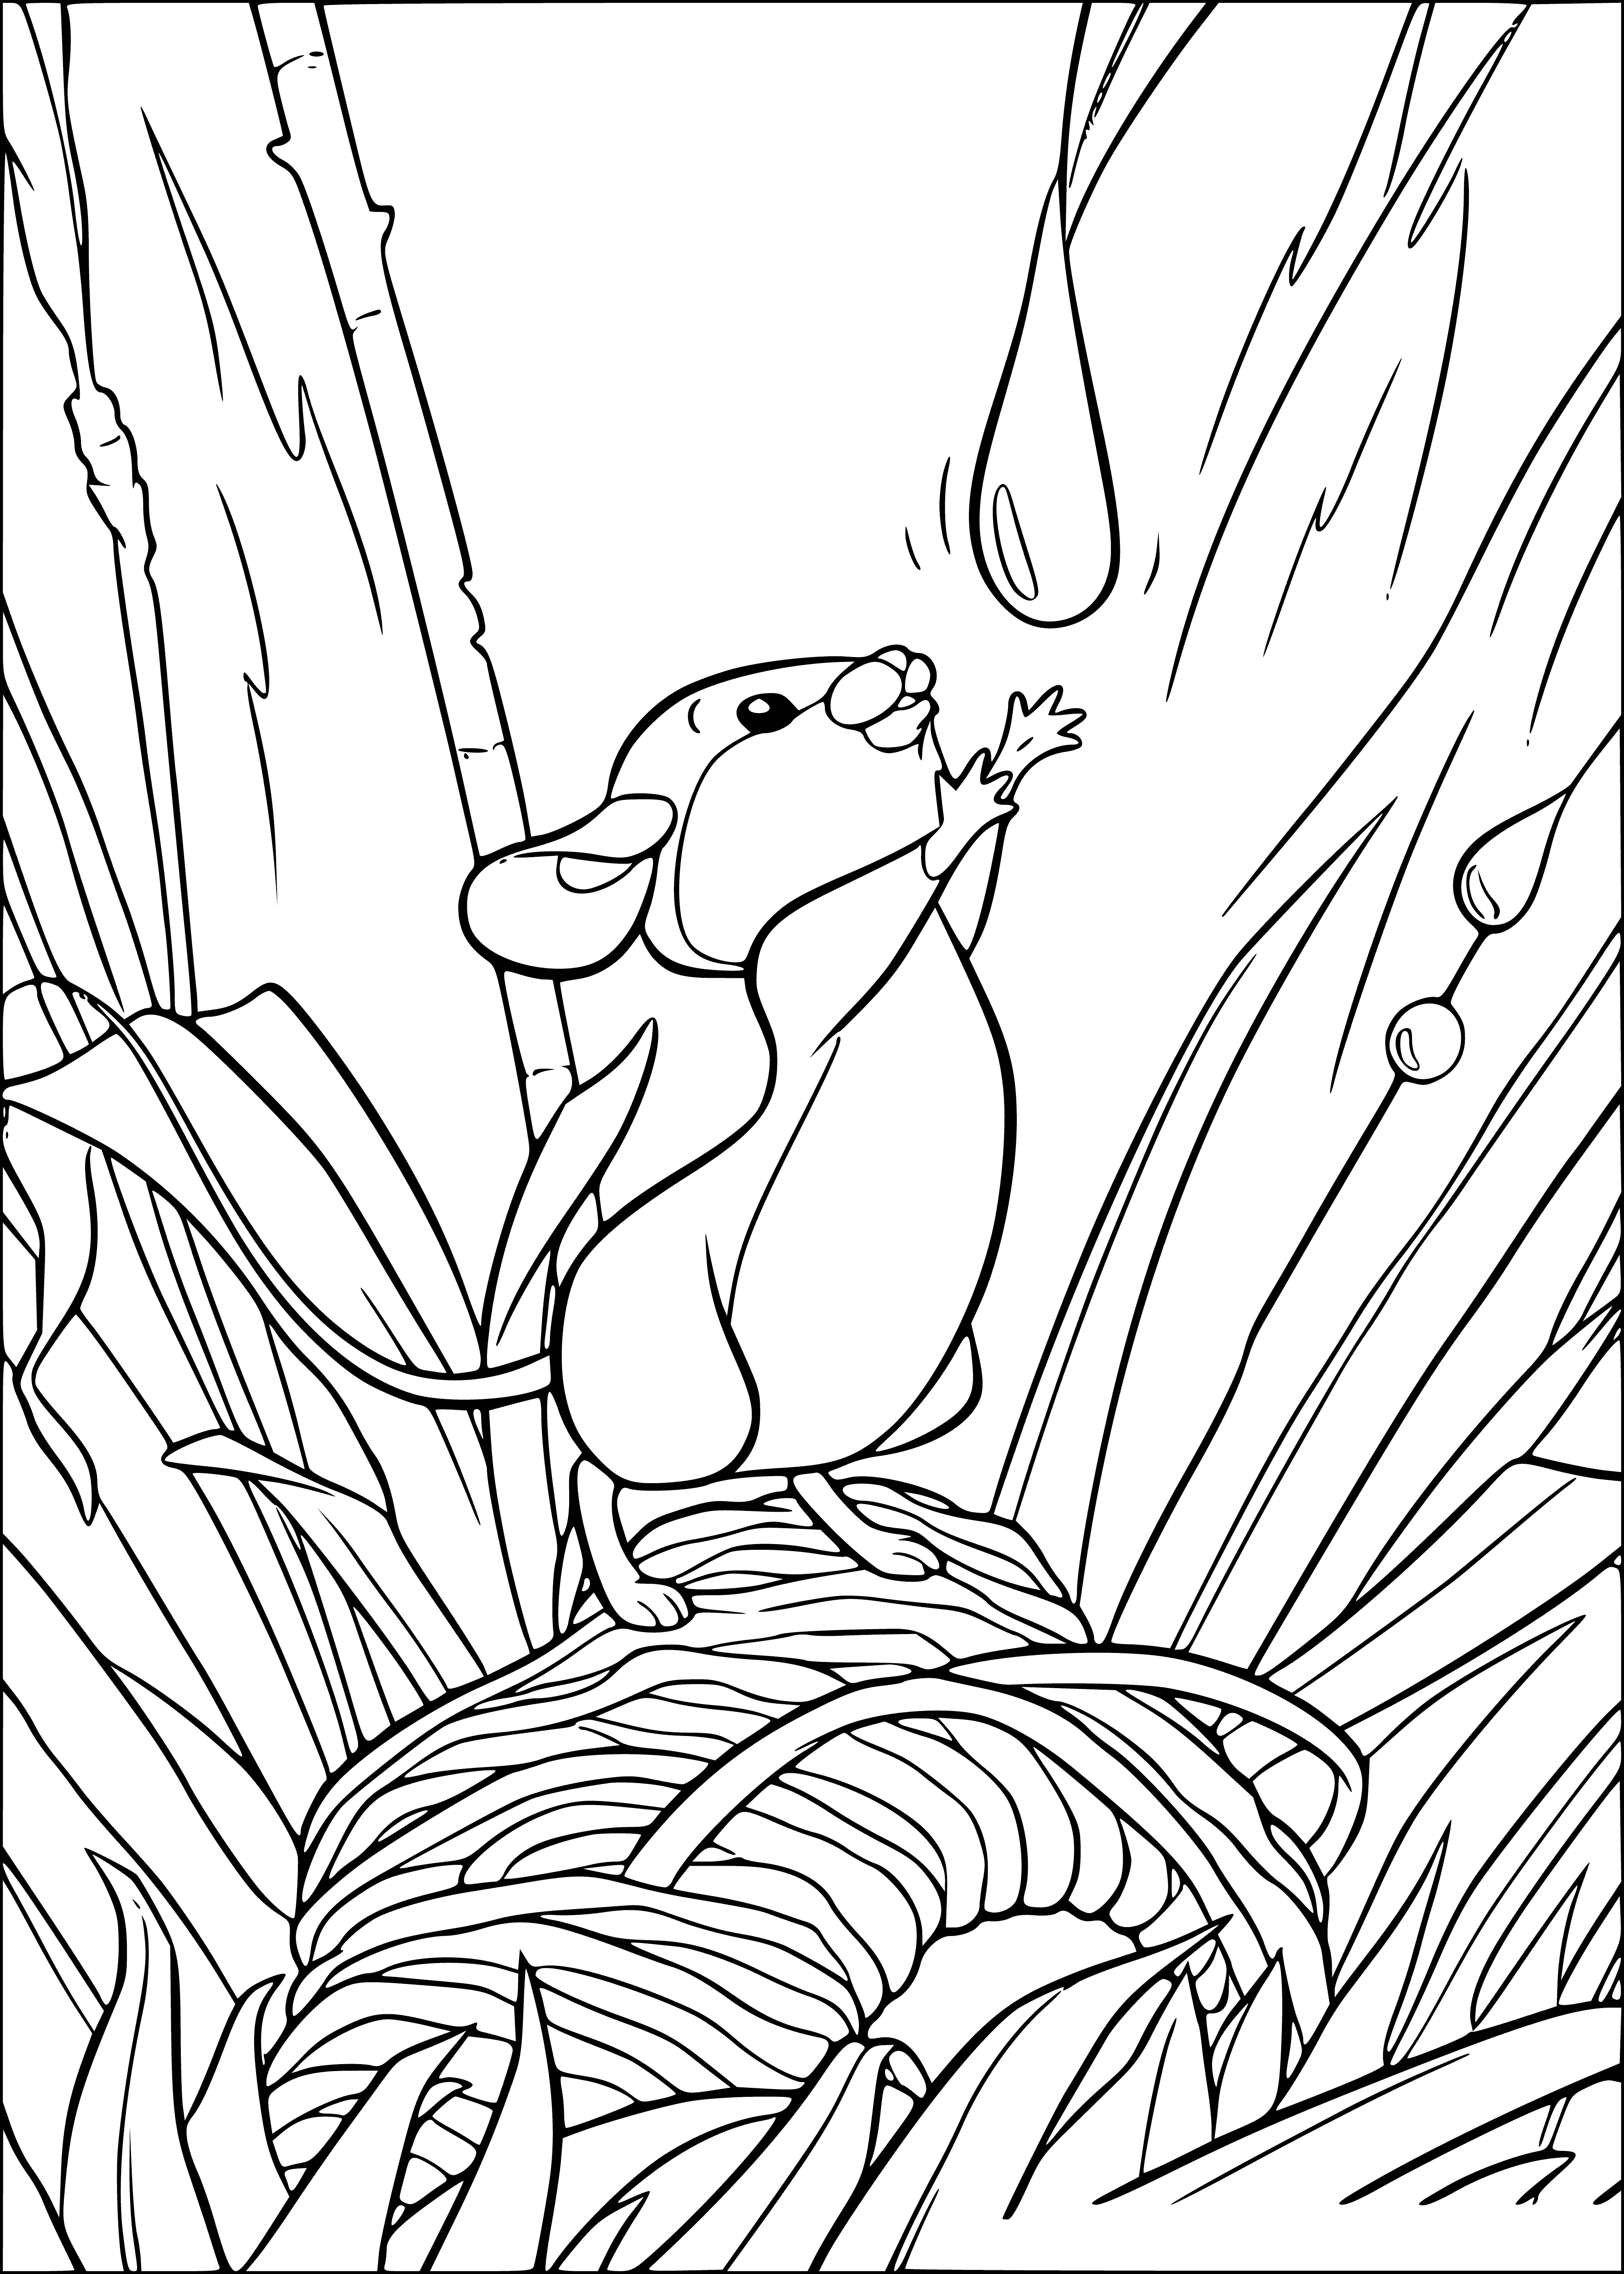 coloring page: A cute mouse pokes its head out of a tree, with big ears and a long tail. #nature